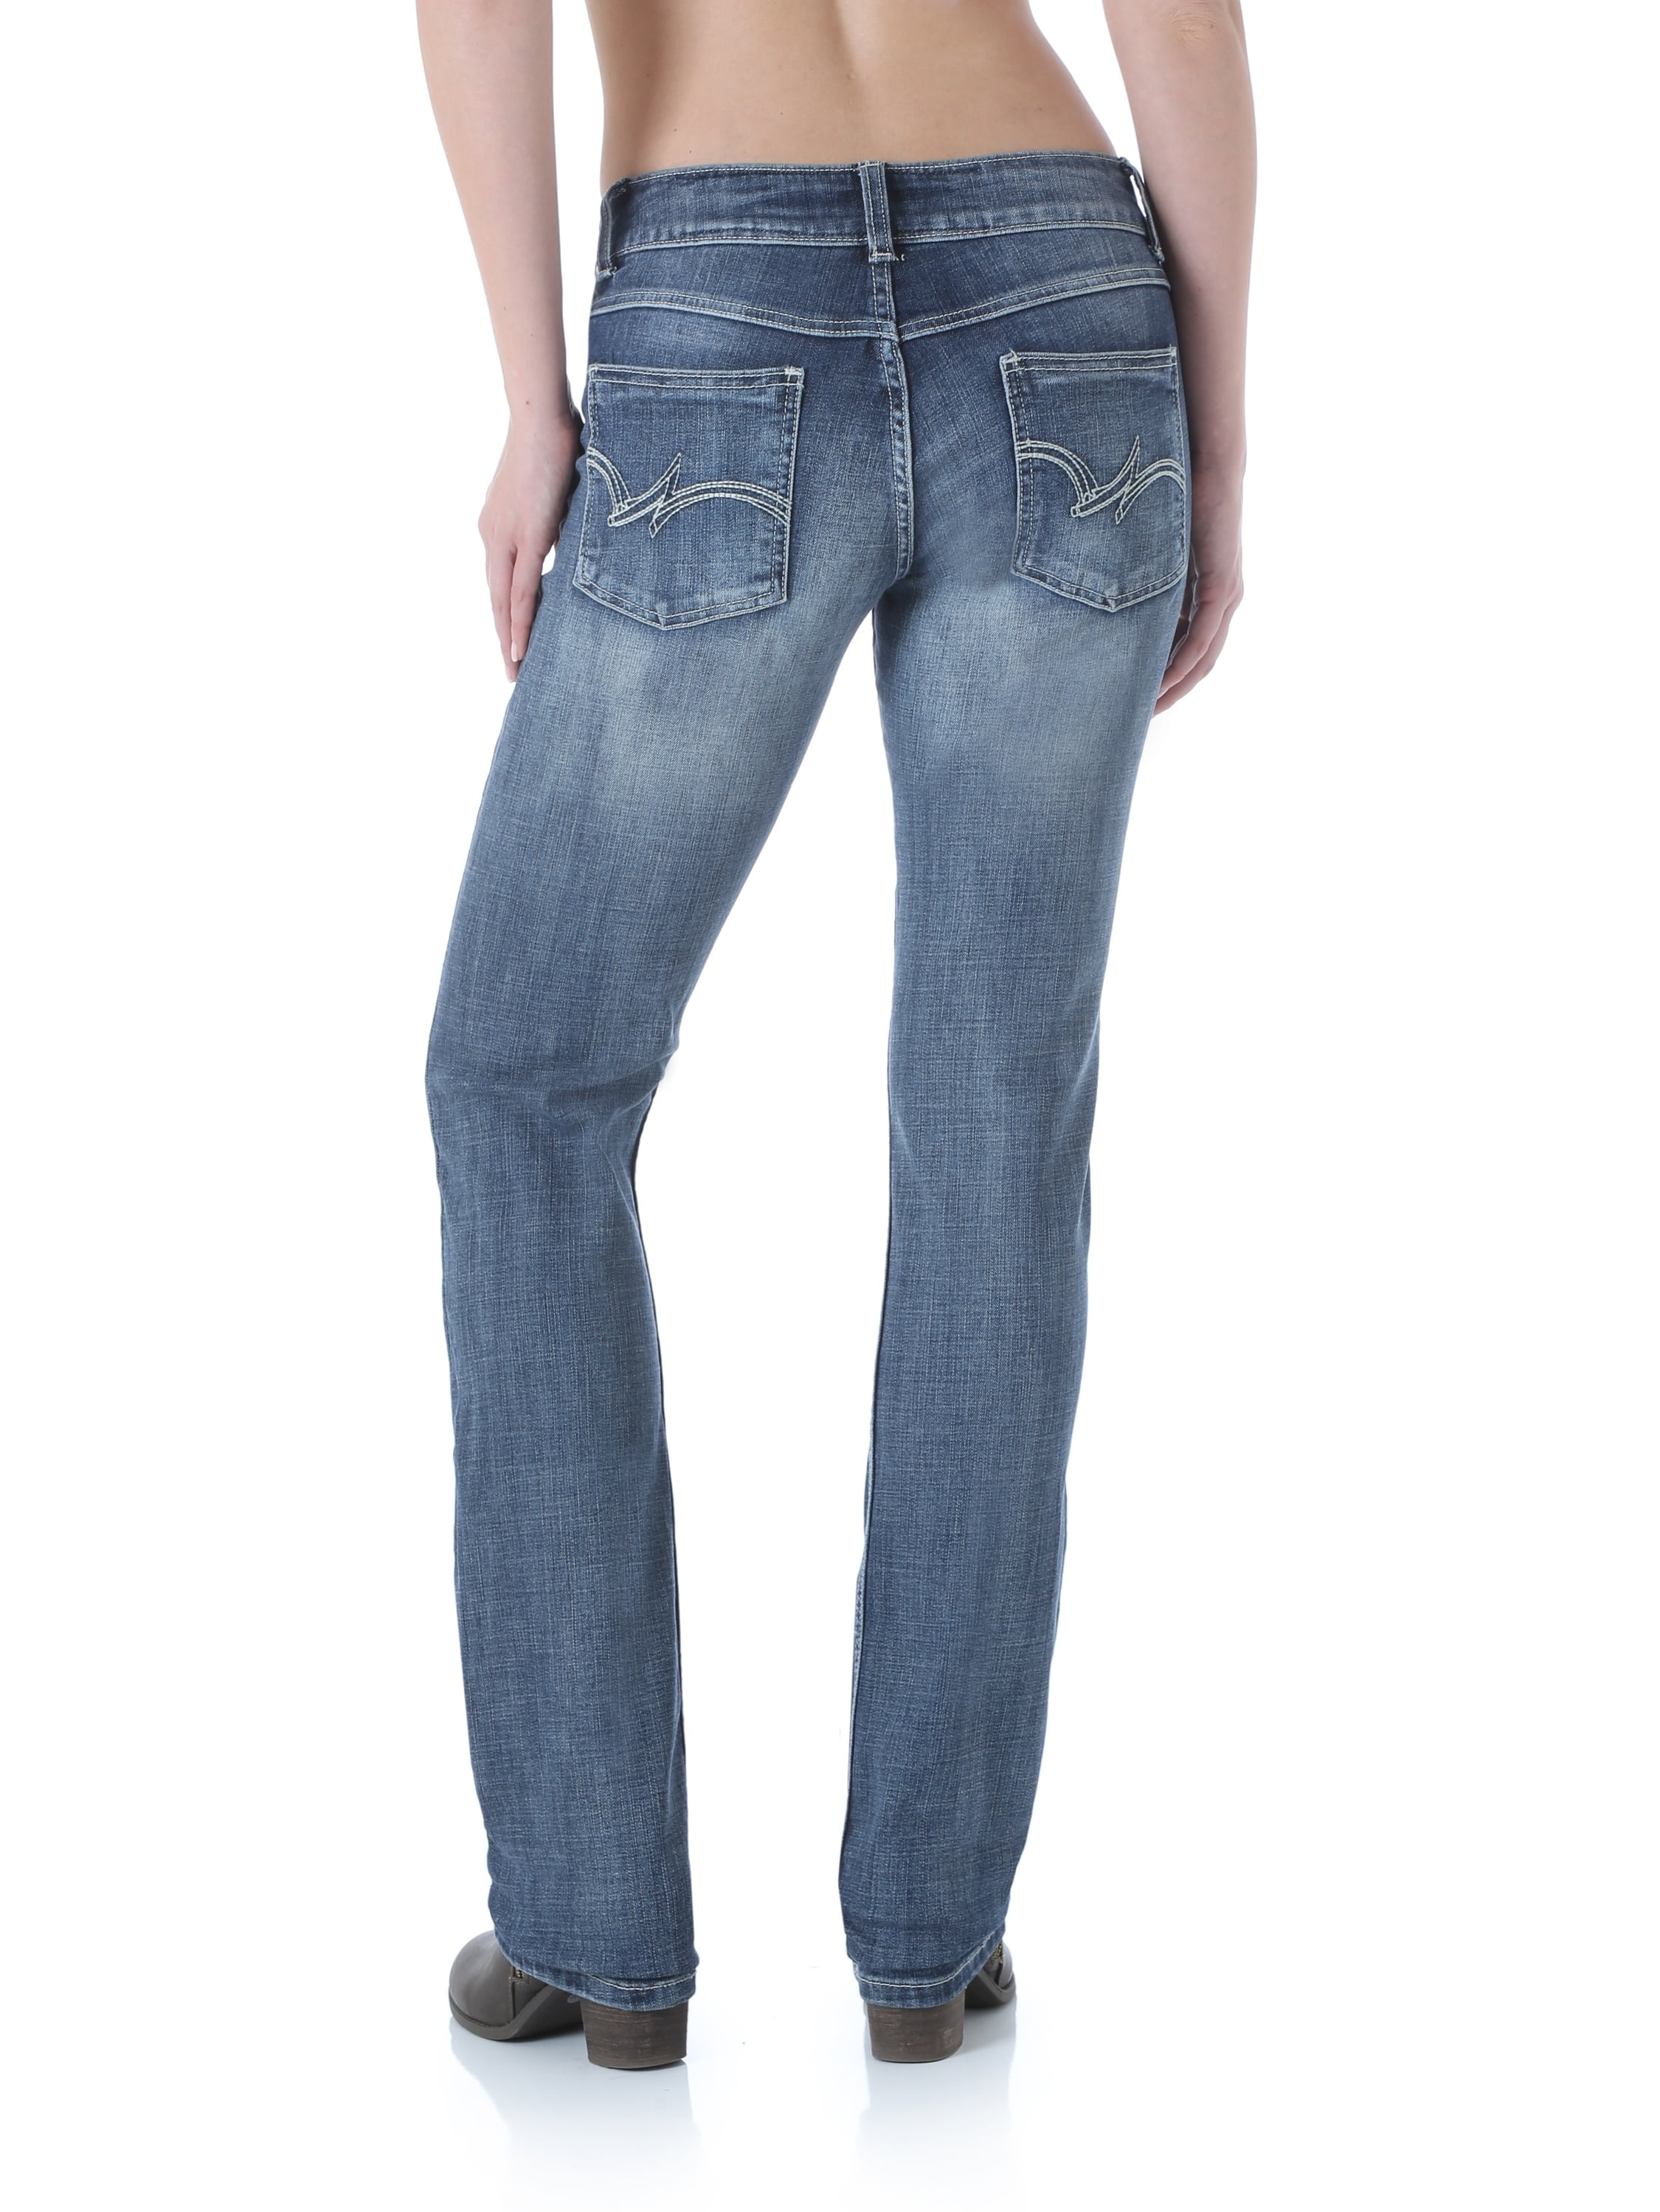 womens straight leg jeans with stretch